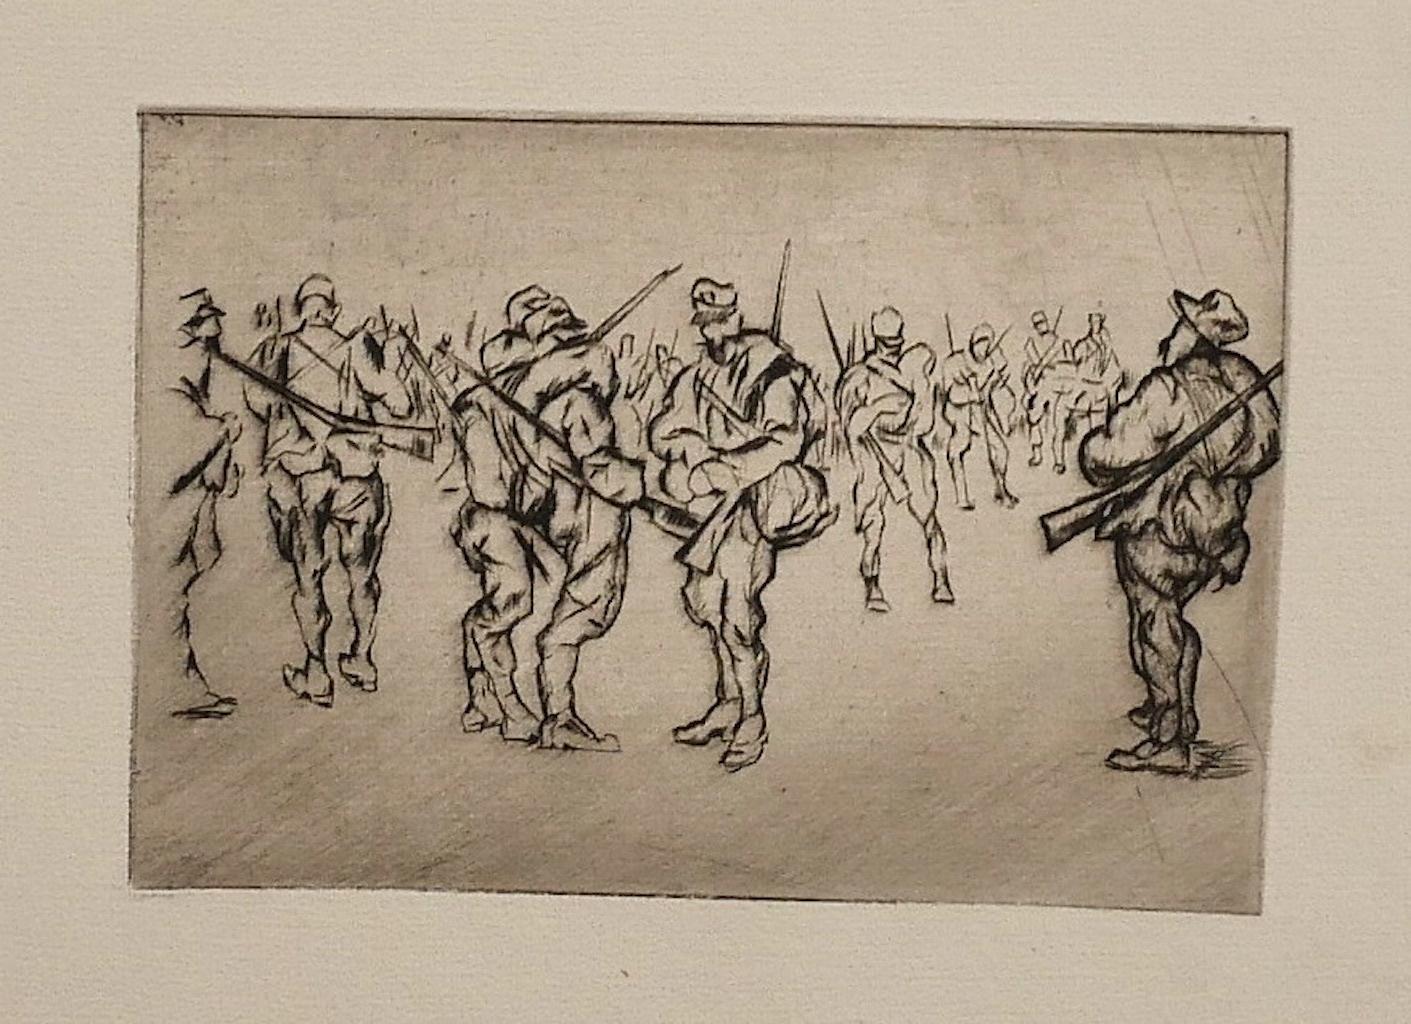 Anselmo Bucci Figurative Print - Le Front Italien - Etching on Paper by A. Bucci - 1918